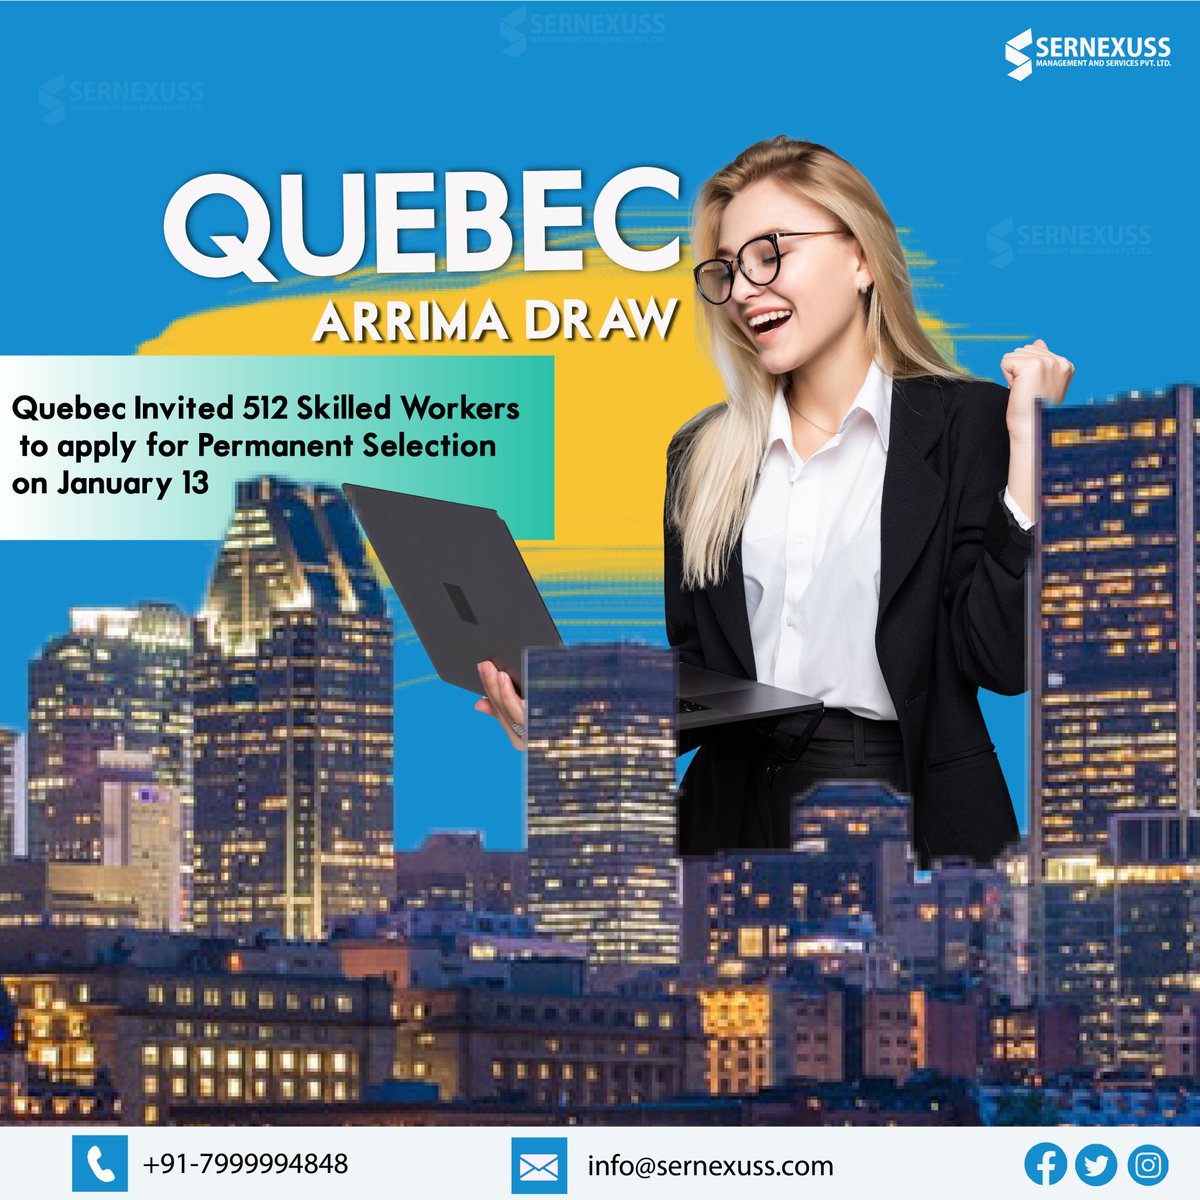 Quebec invites 512 in first Arrima draw of 2022.

Learn more: bit.ly/3r9VWRL

#Quebecimmigration #Quebecarrimadraw #Quebecinvites #newarrimadraw #canadaimmigration #canadapr #sernexuss